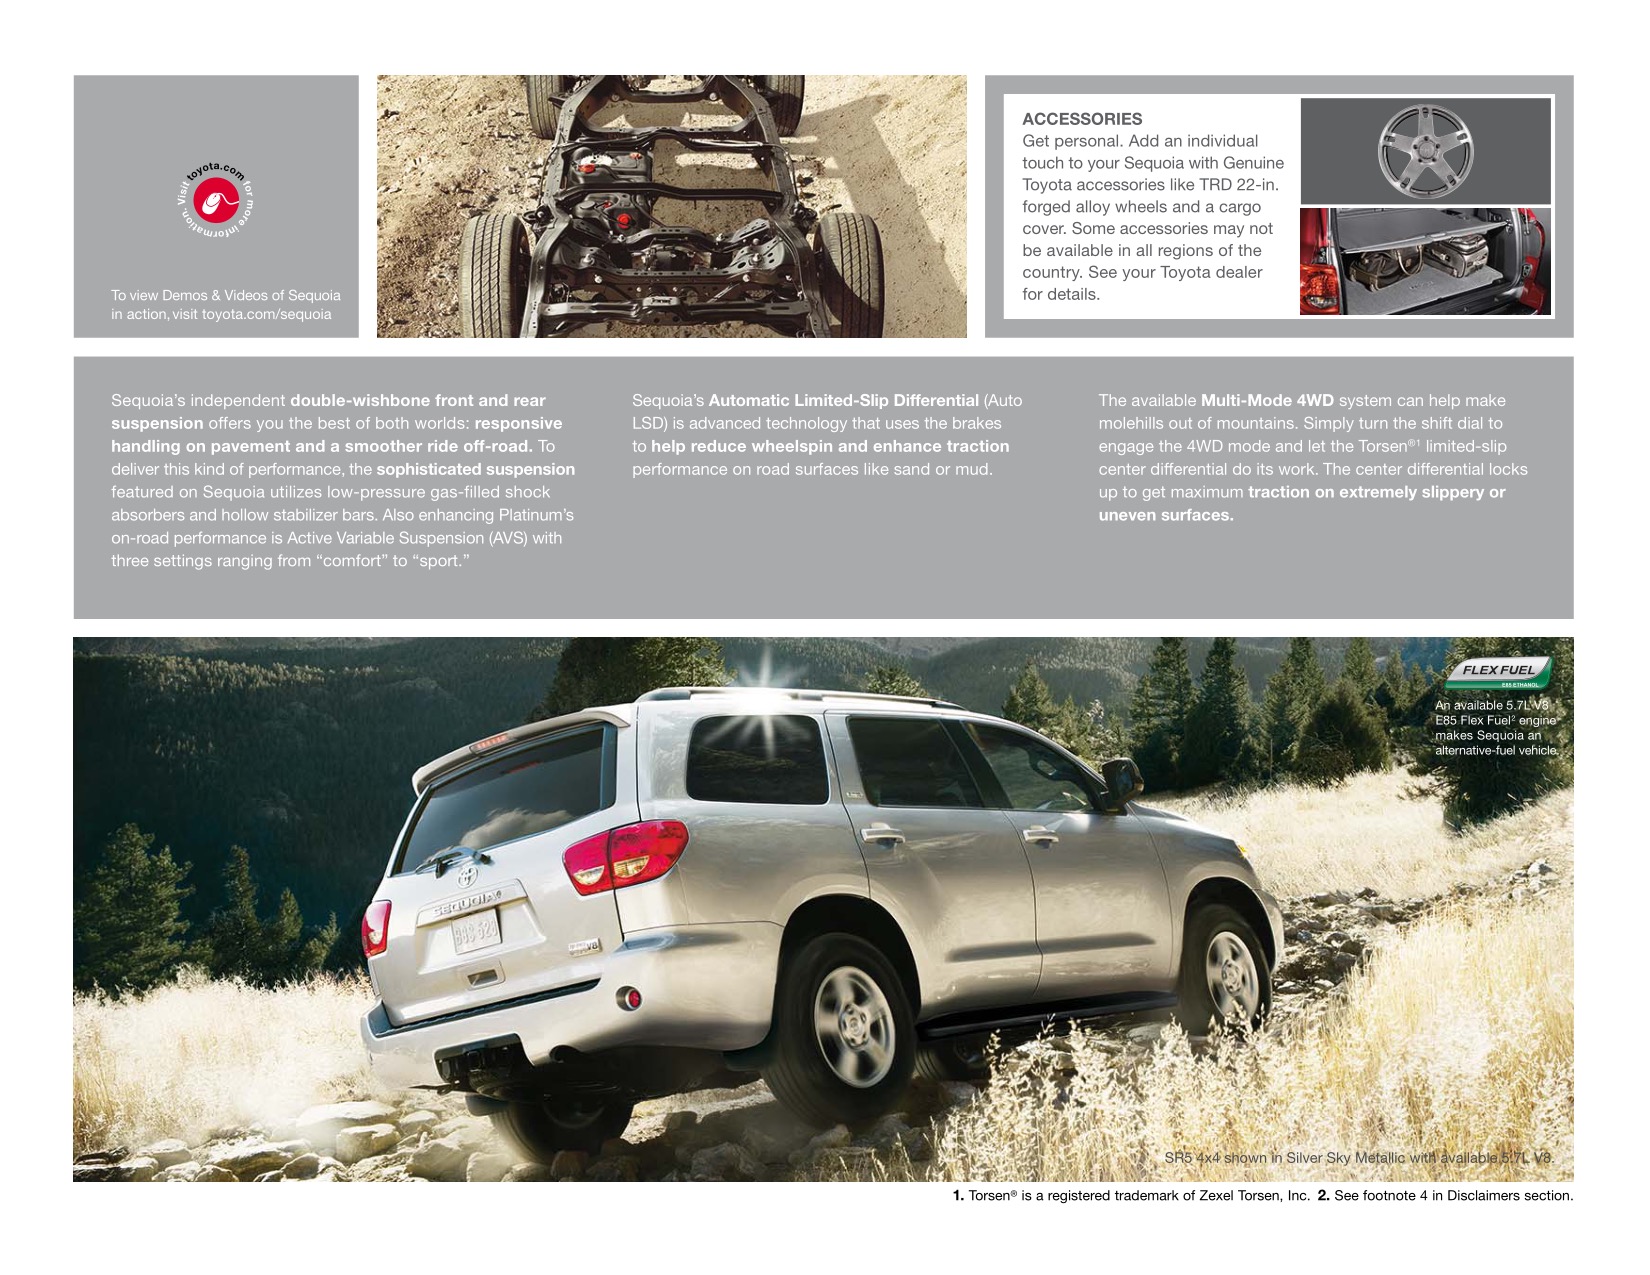 2011 Toyota Sequoia Brochure Page 1